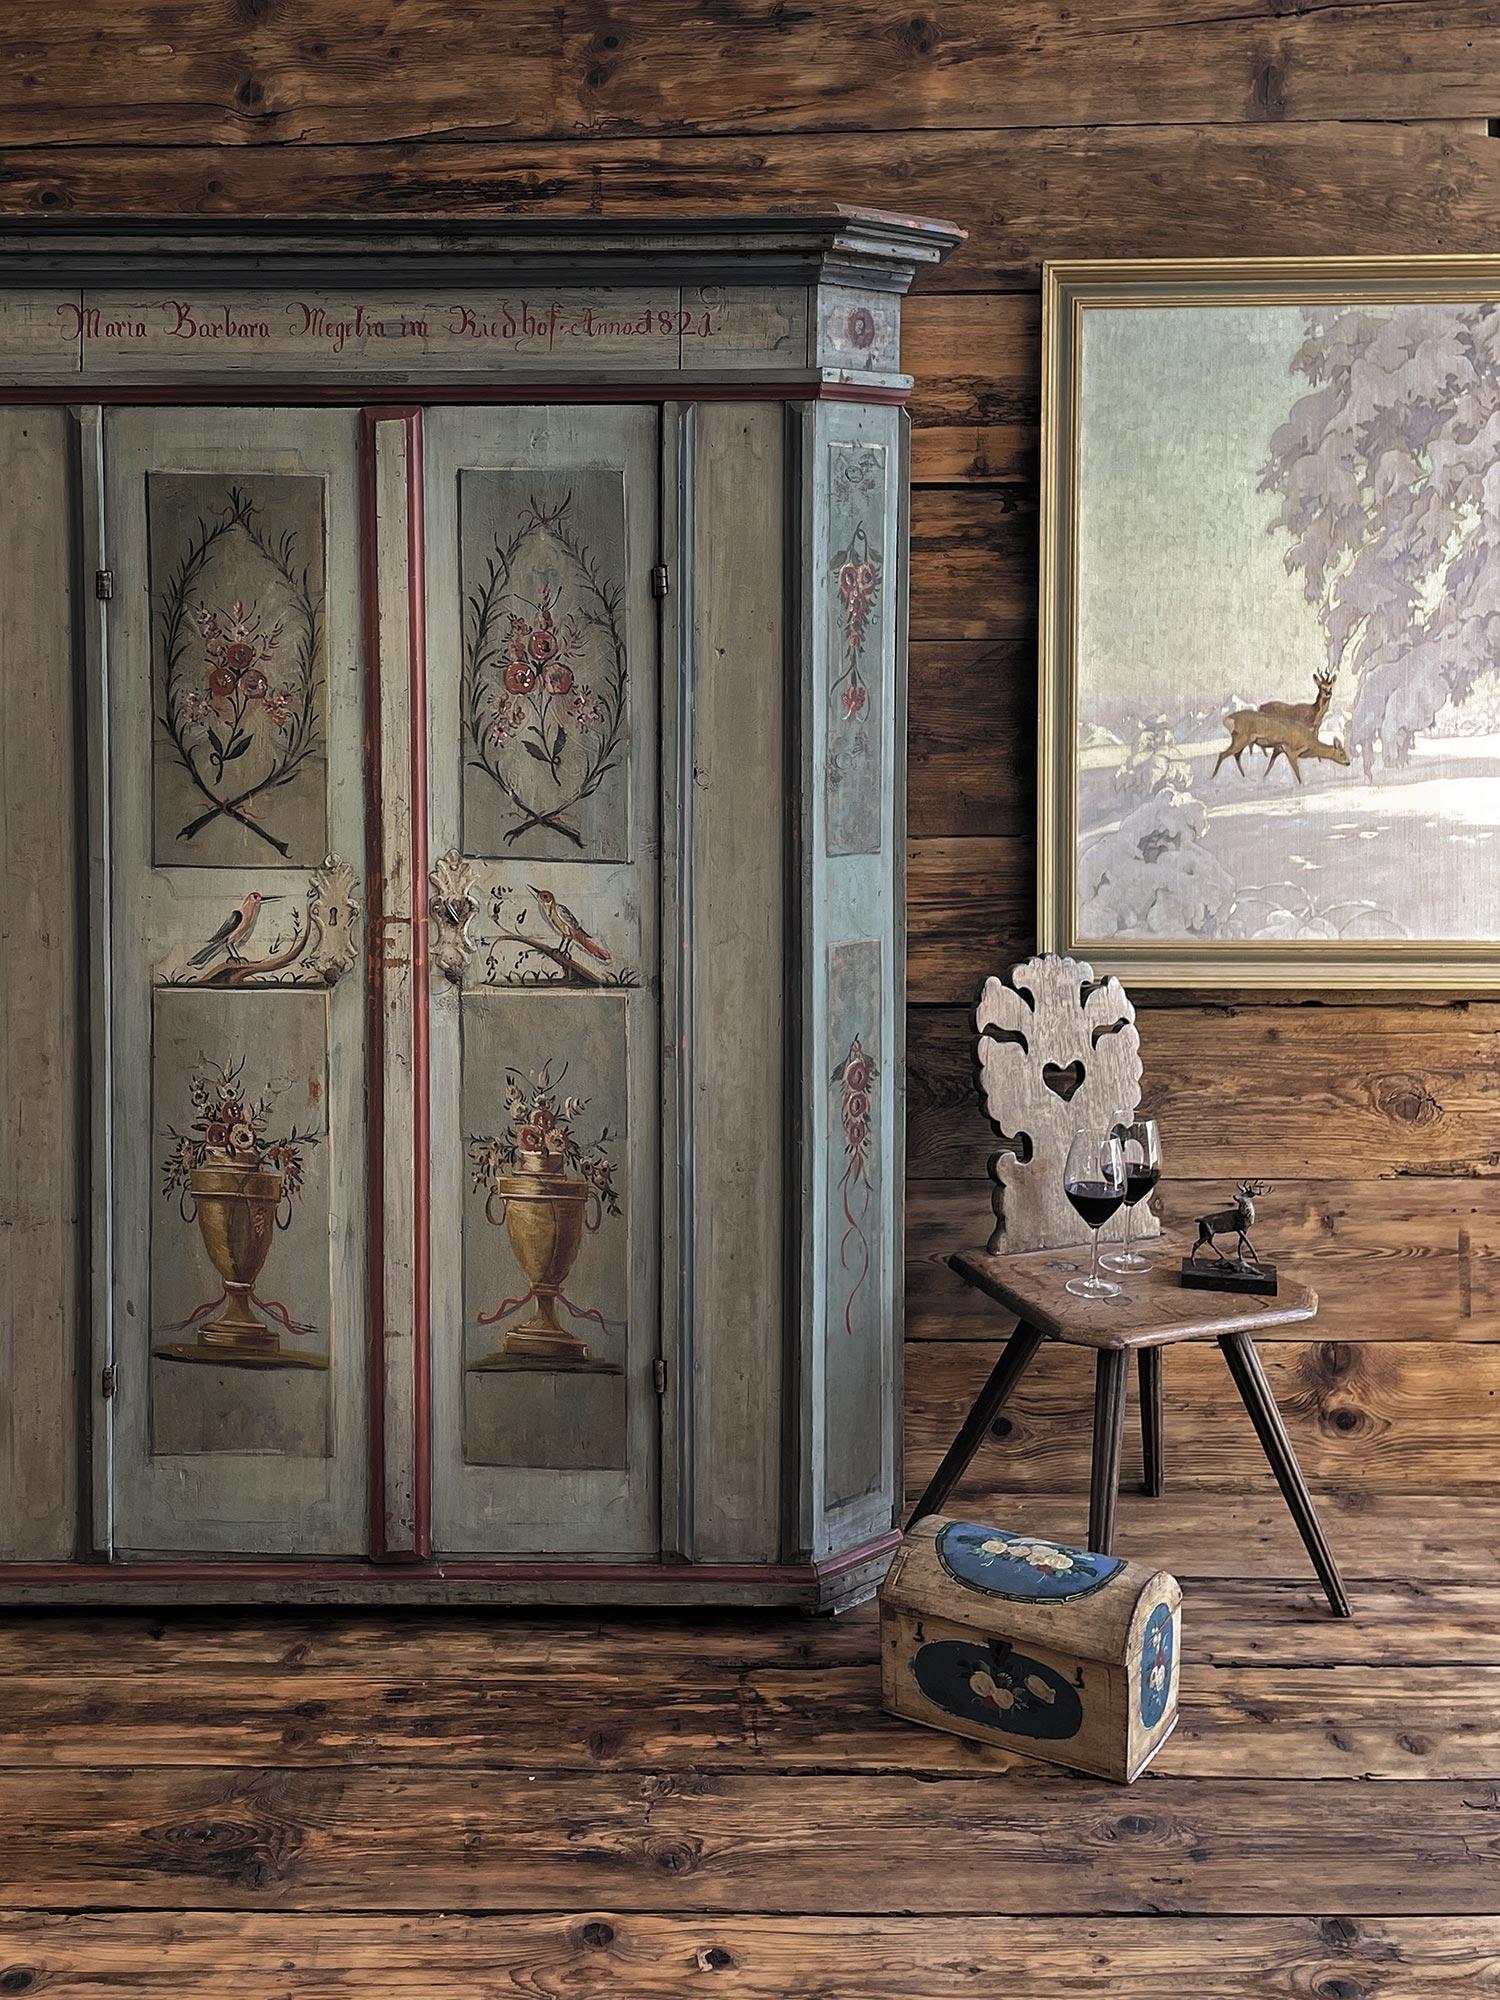 Painted cabinet dated 1821
CODE: A198
H. 192cm – L. 141 cm (155 at the frames) – P. 46cm (54 at the frames)

Painted wardrobe, entirely made of fir wood and painted light blue. Floral decorations are depicted on the two doors, contained in rich cups